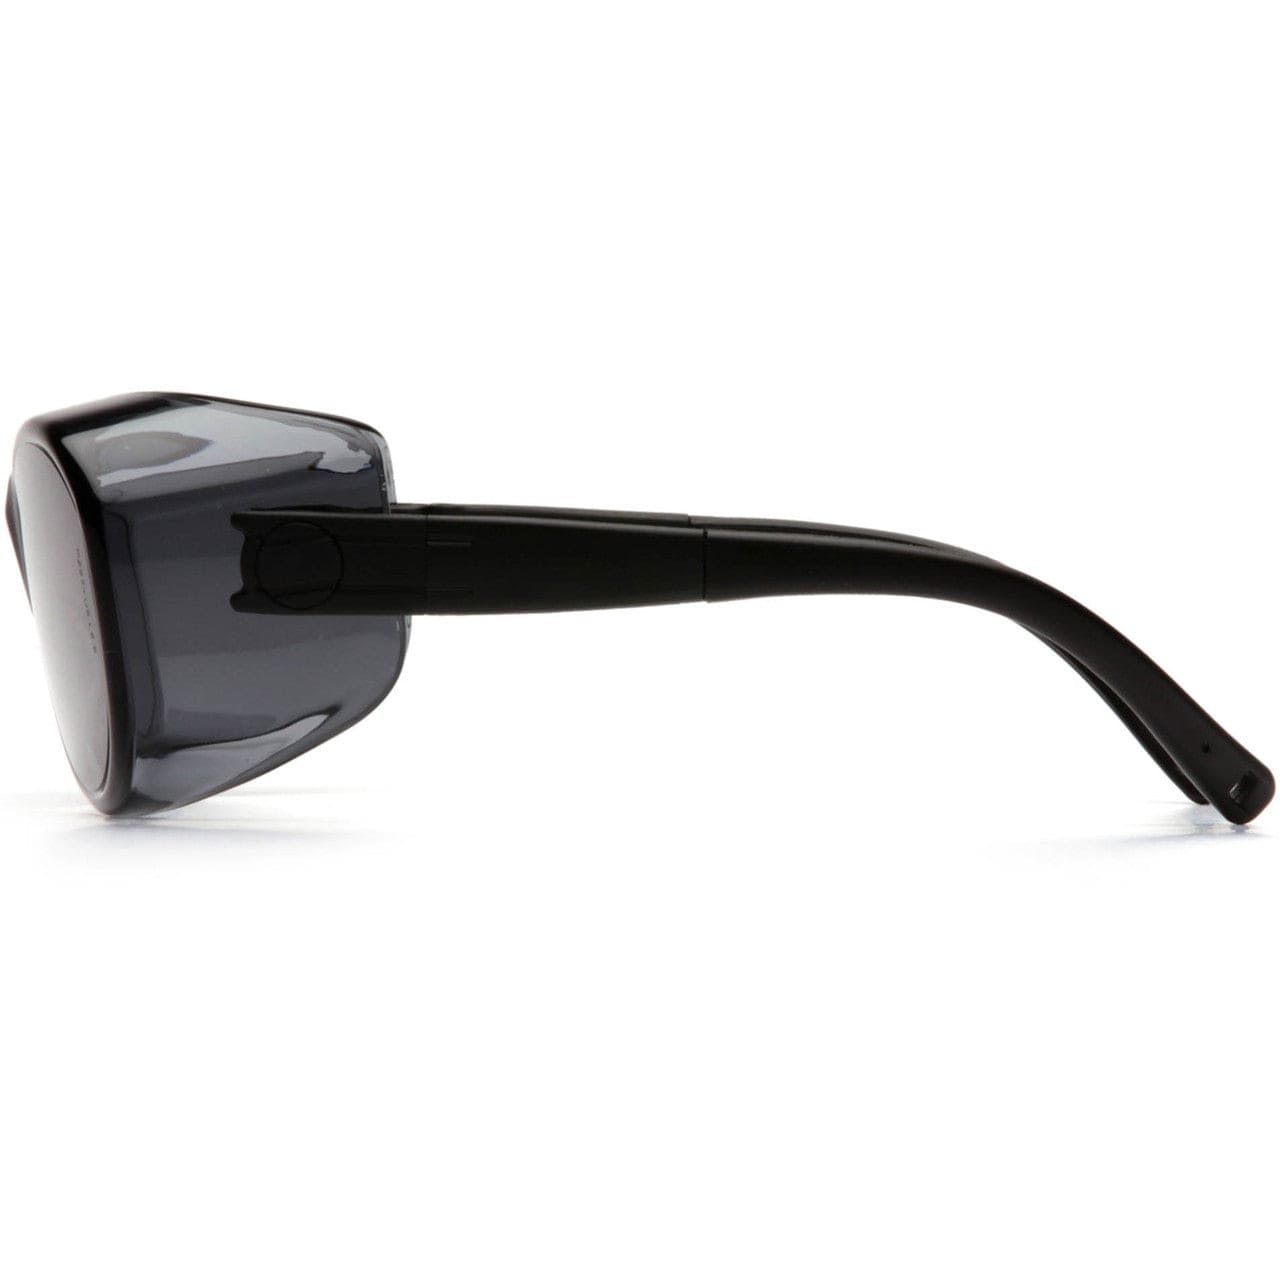 Pyramex S3520SJ OTS Safety Glasses Black Temples Gray Lens Side View